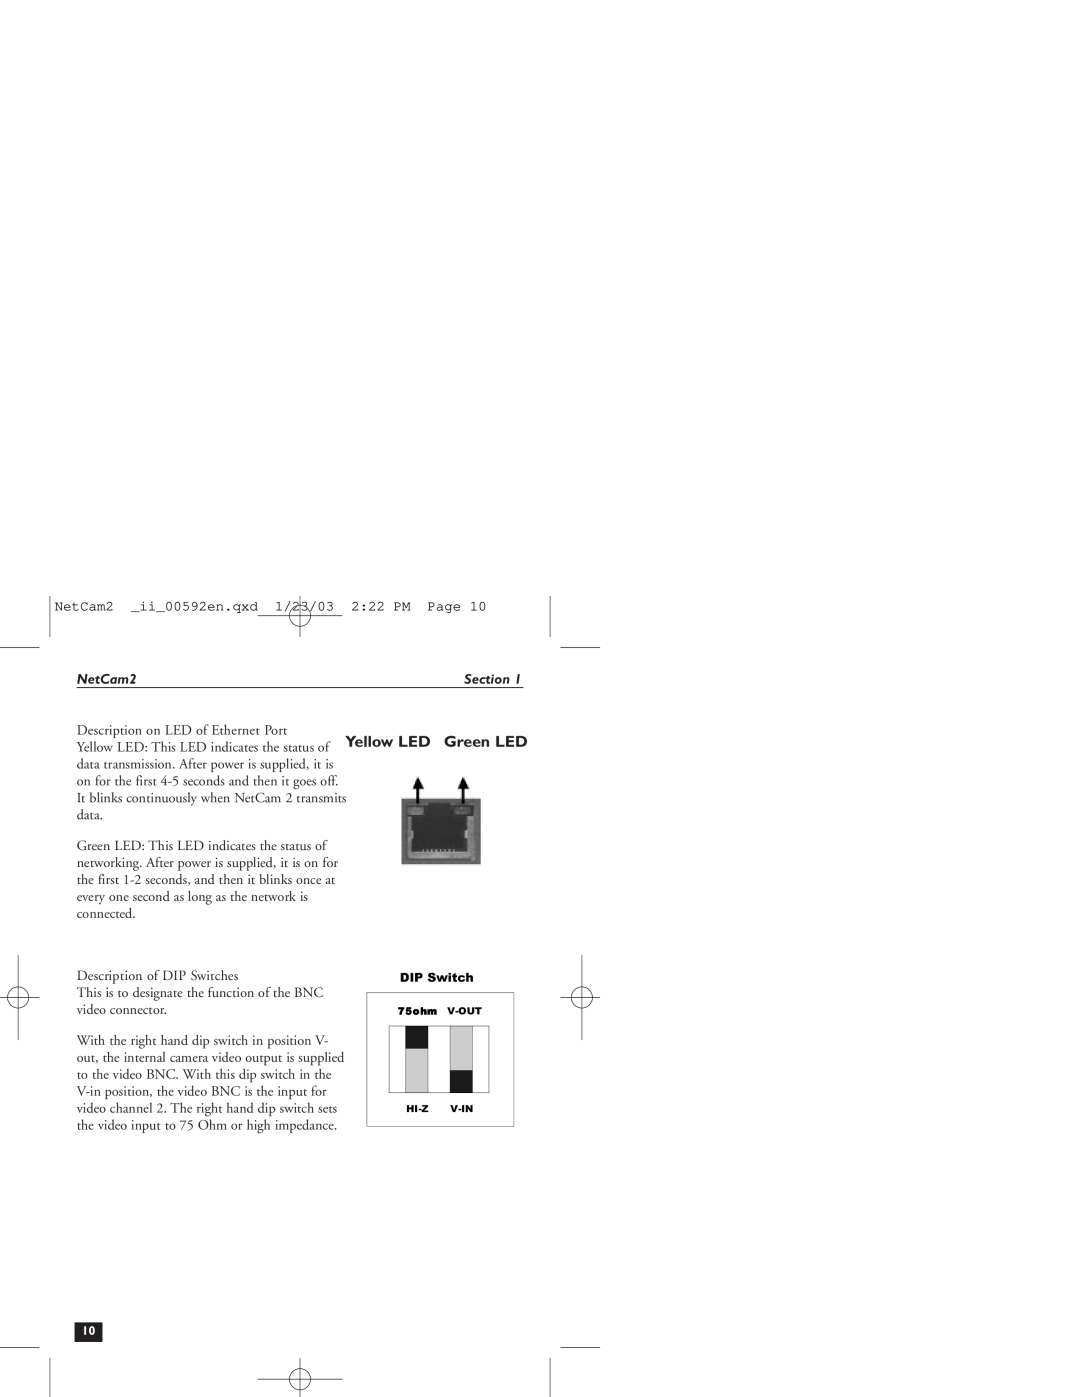 Philips installation instructions NetCam2, Description of DIP Switches 